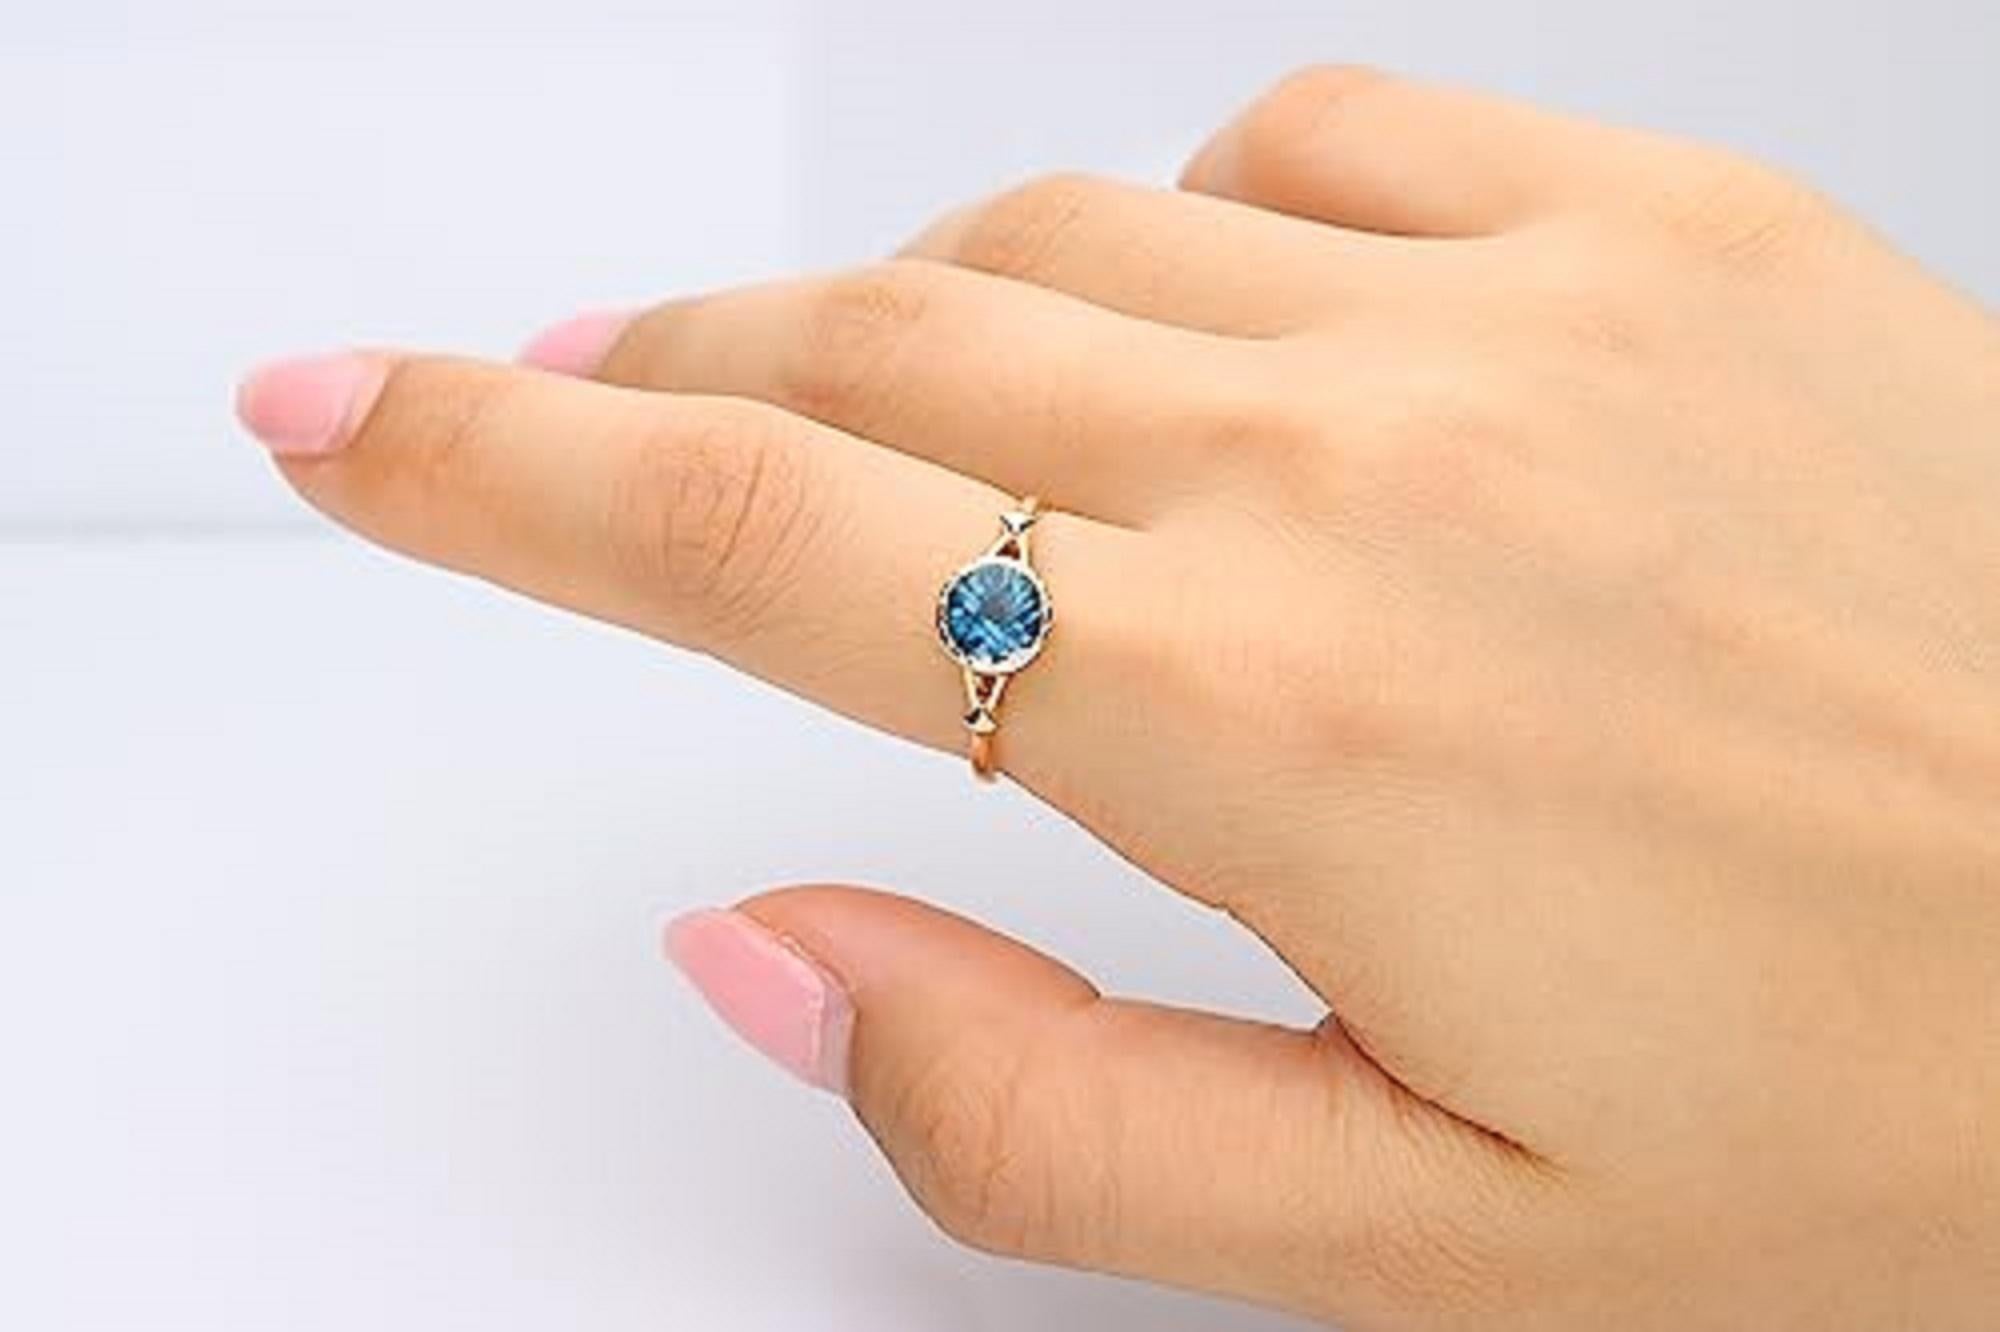 Decorate yourself in elegance with this Ring is crafted from 14-karat Yellow Gold by Gin & Grace. This Ring is made up of 7*7 Round-cut Swiss Blue Topaz (1 Pcs) 1.63 carat.This Ring is weight 1.84 grams. This delicate Ring is polished to a high